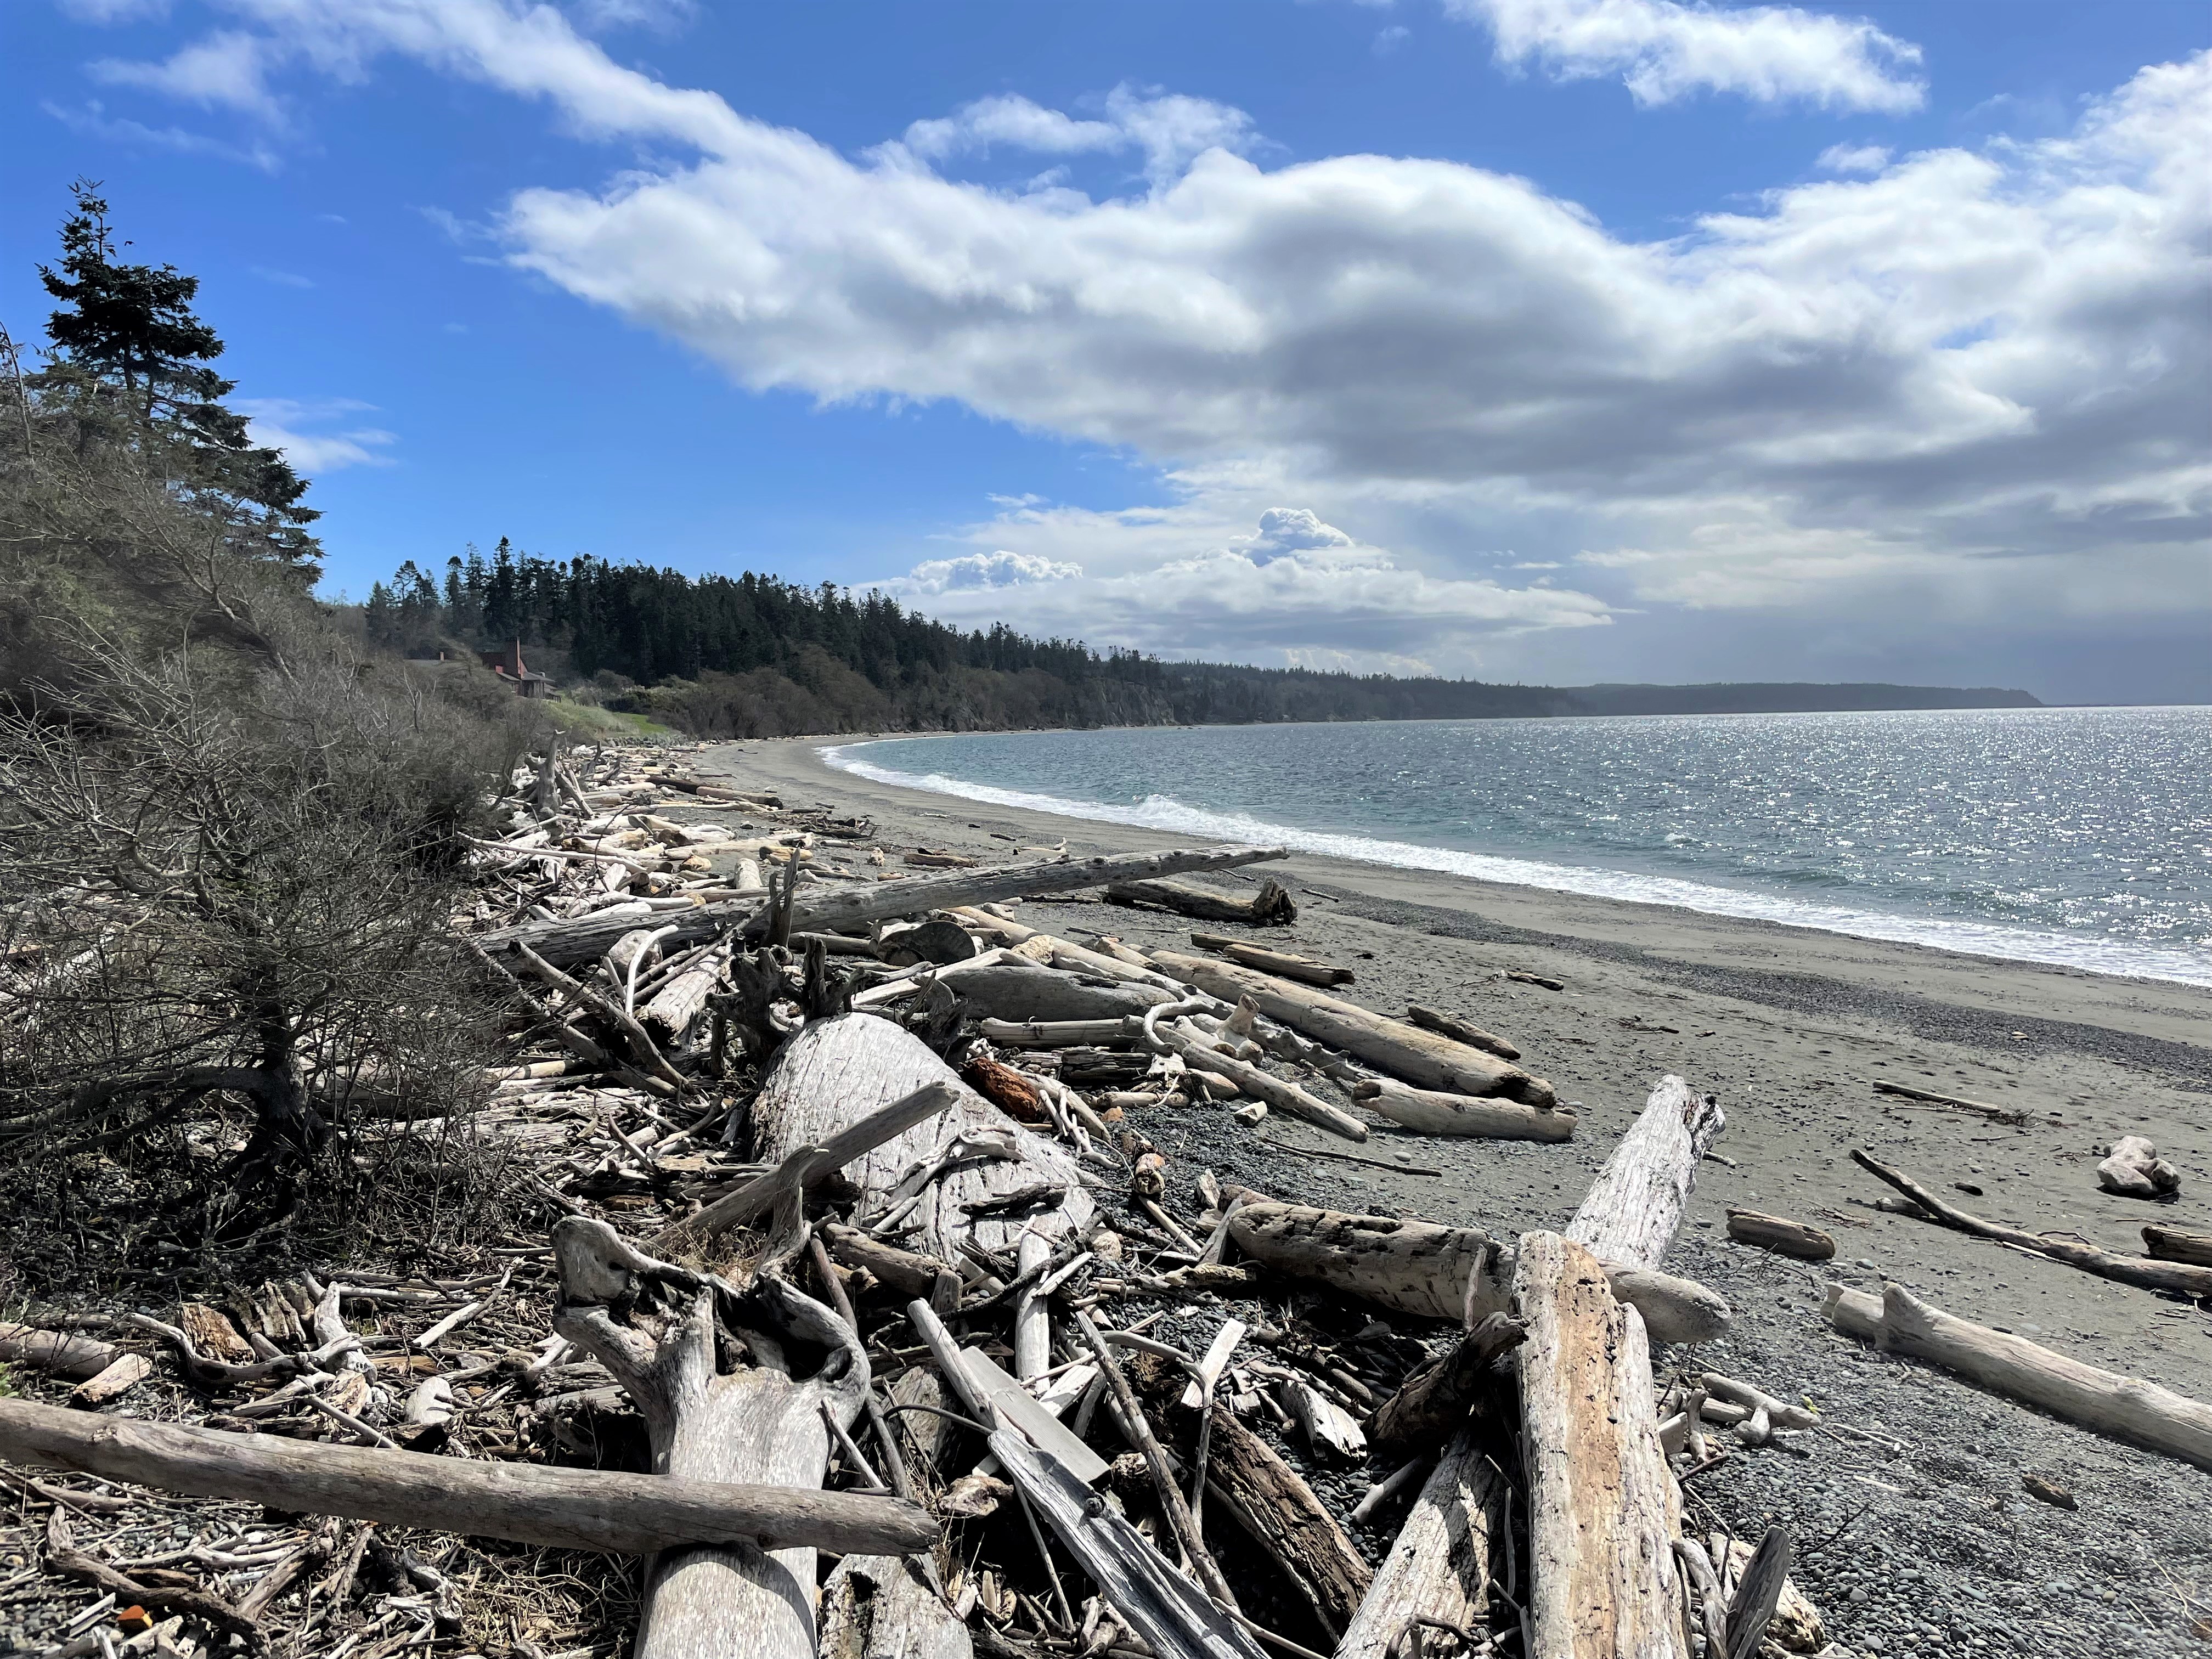 View of shoreline to the right and a driftwood-laden coast on the left along Admiralty Inlet on Whidbey Island.